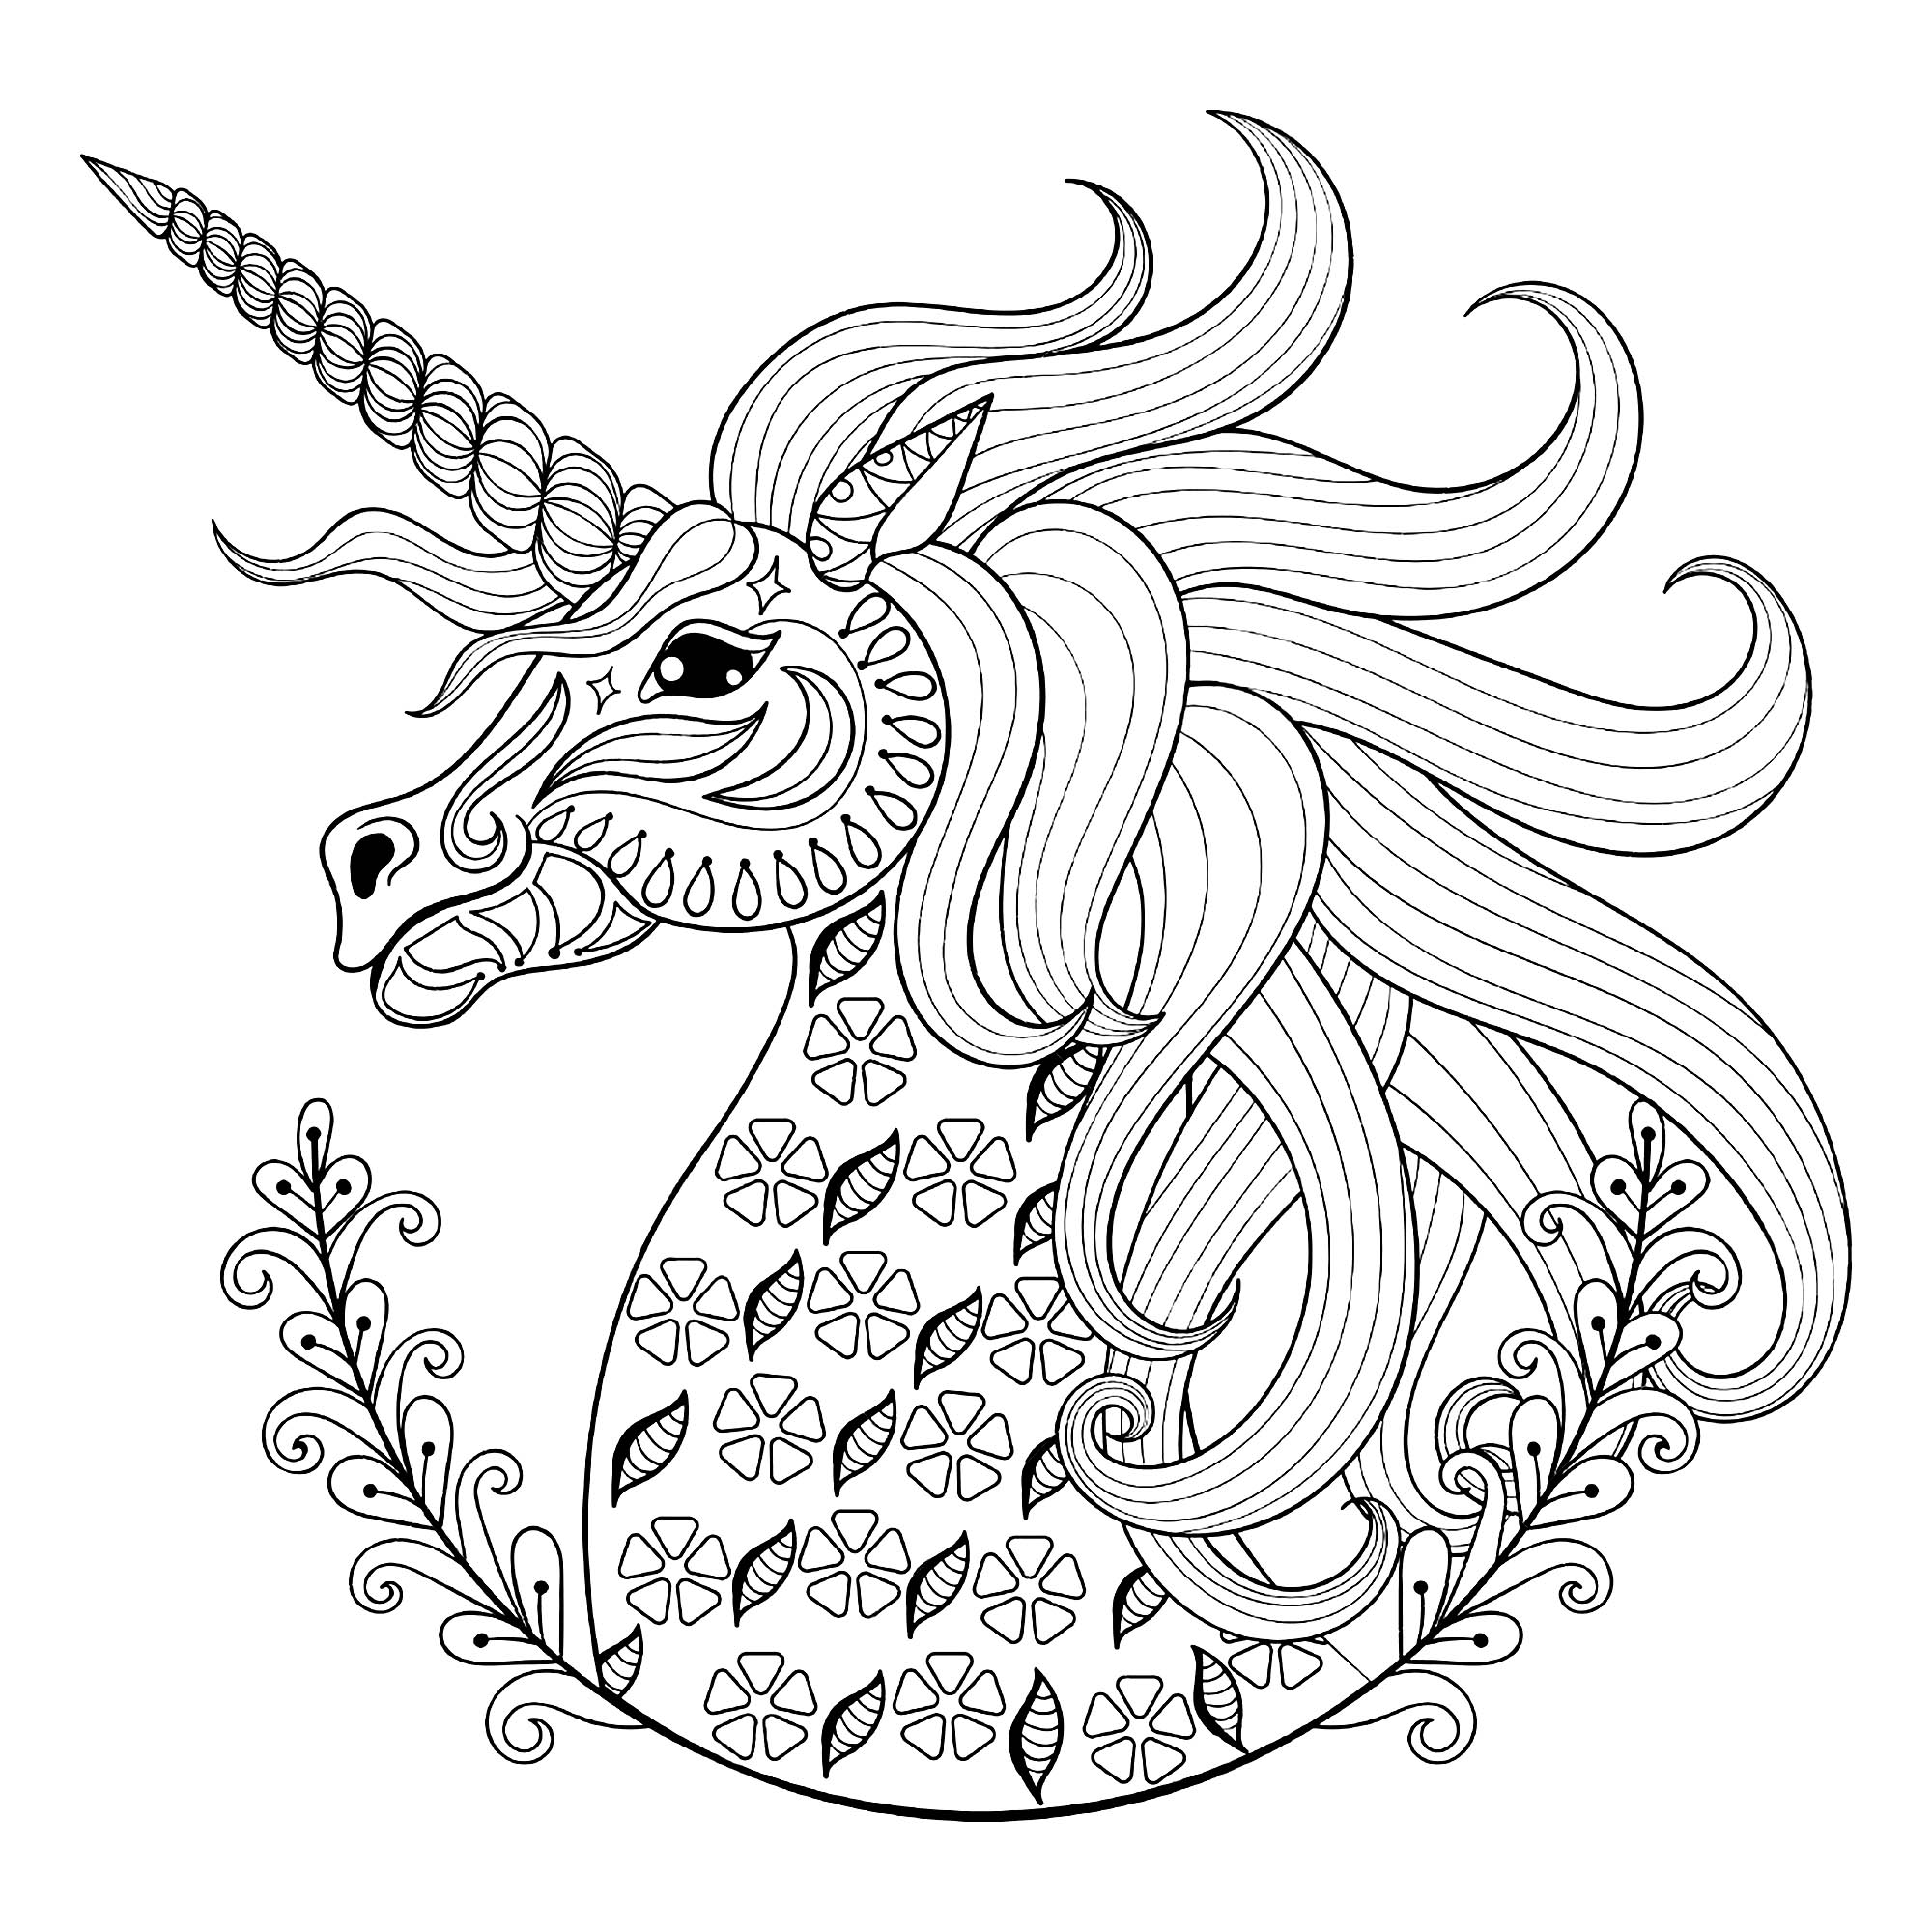 Unicorn's head with simple floral patterns, Source : 123rf   Artist : Ipanki